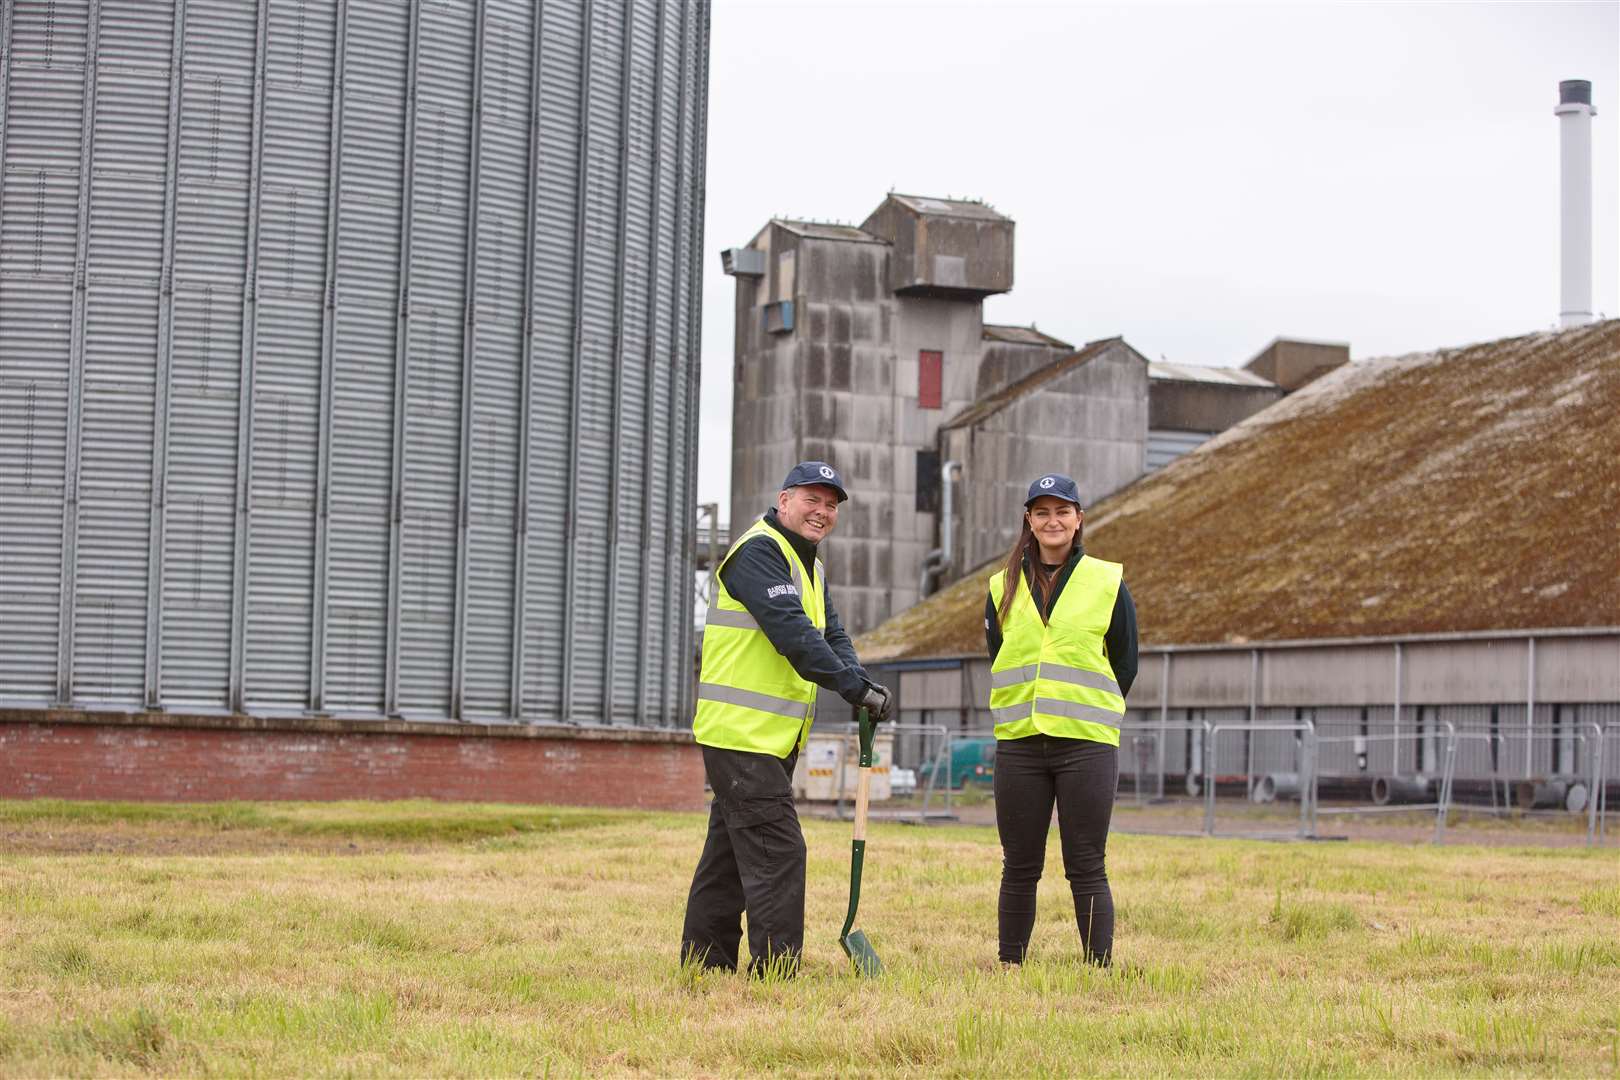 Senior malt technician Alex Glass and Isla Prentice, project coordinator for Bairds Malt, signal the start of expansion work at the maltings in Inverness.